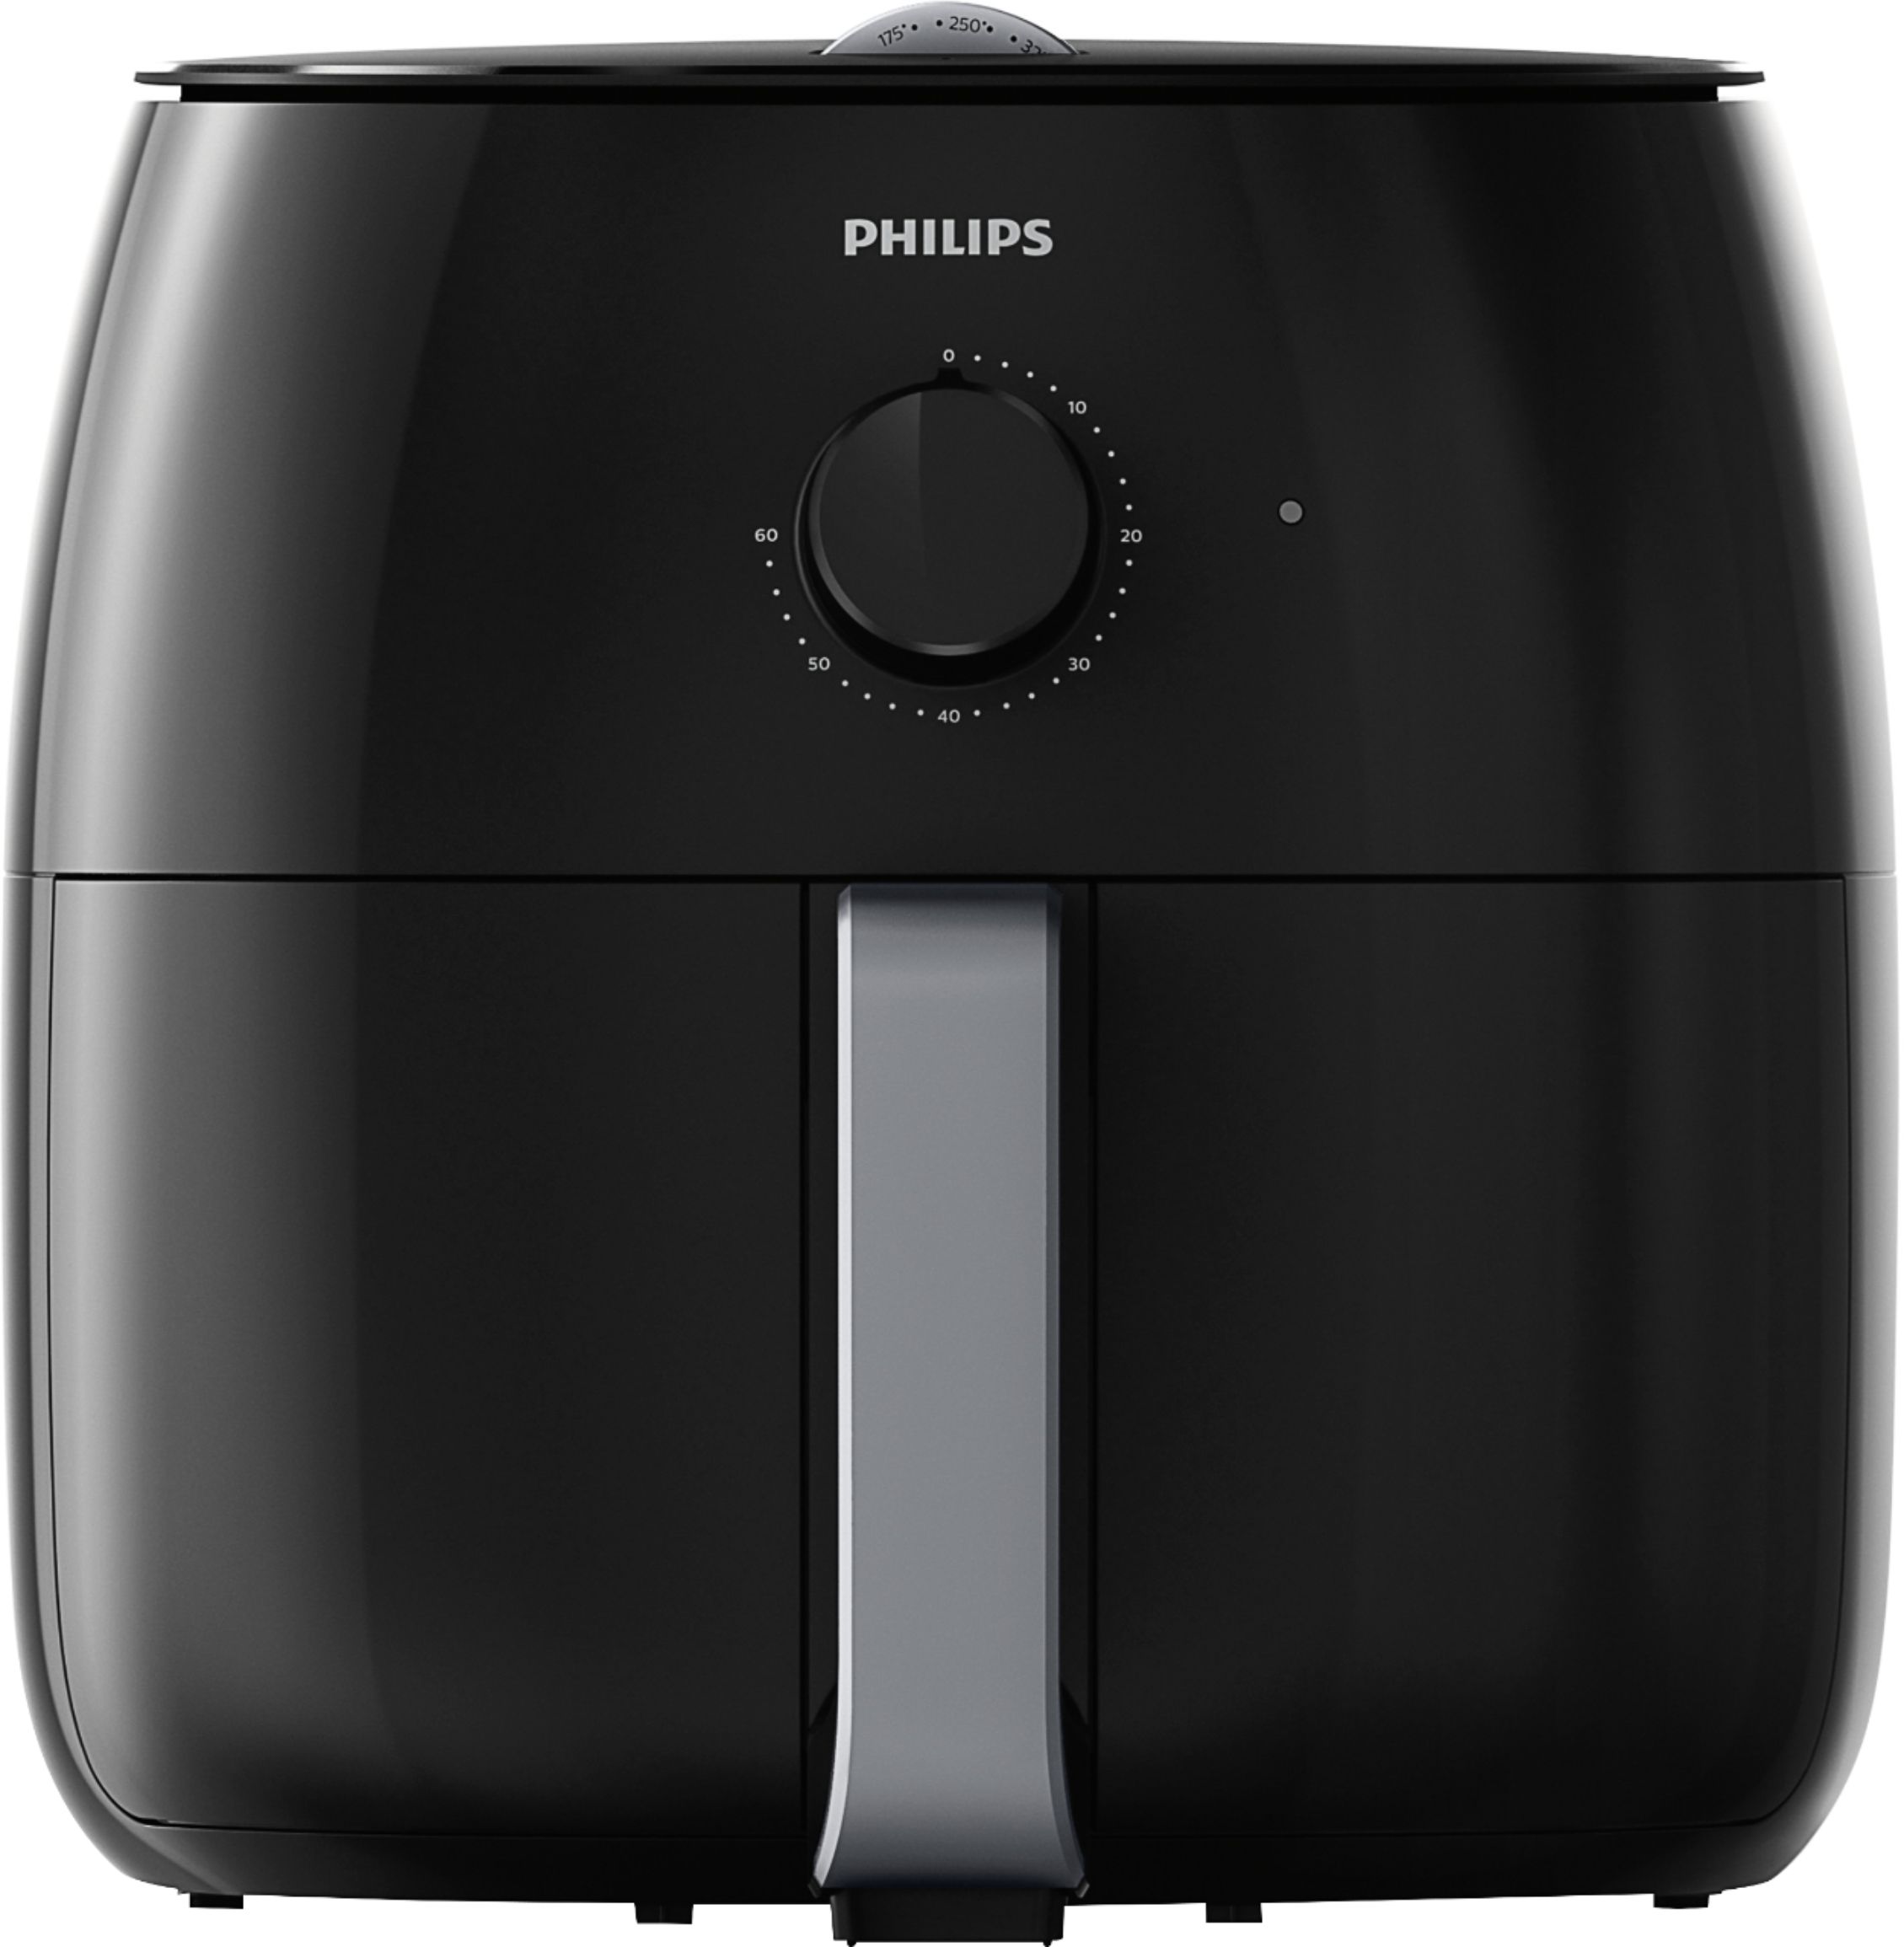 Angle View: Philips - Airfryer XXL, Twin TurboStar, Avance Collection- Black - Black